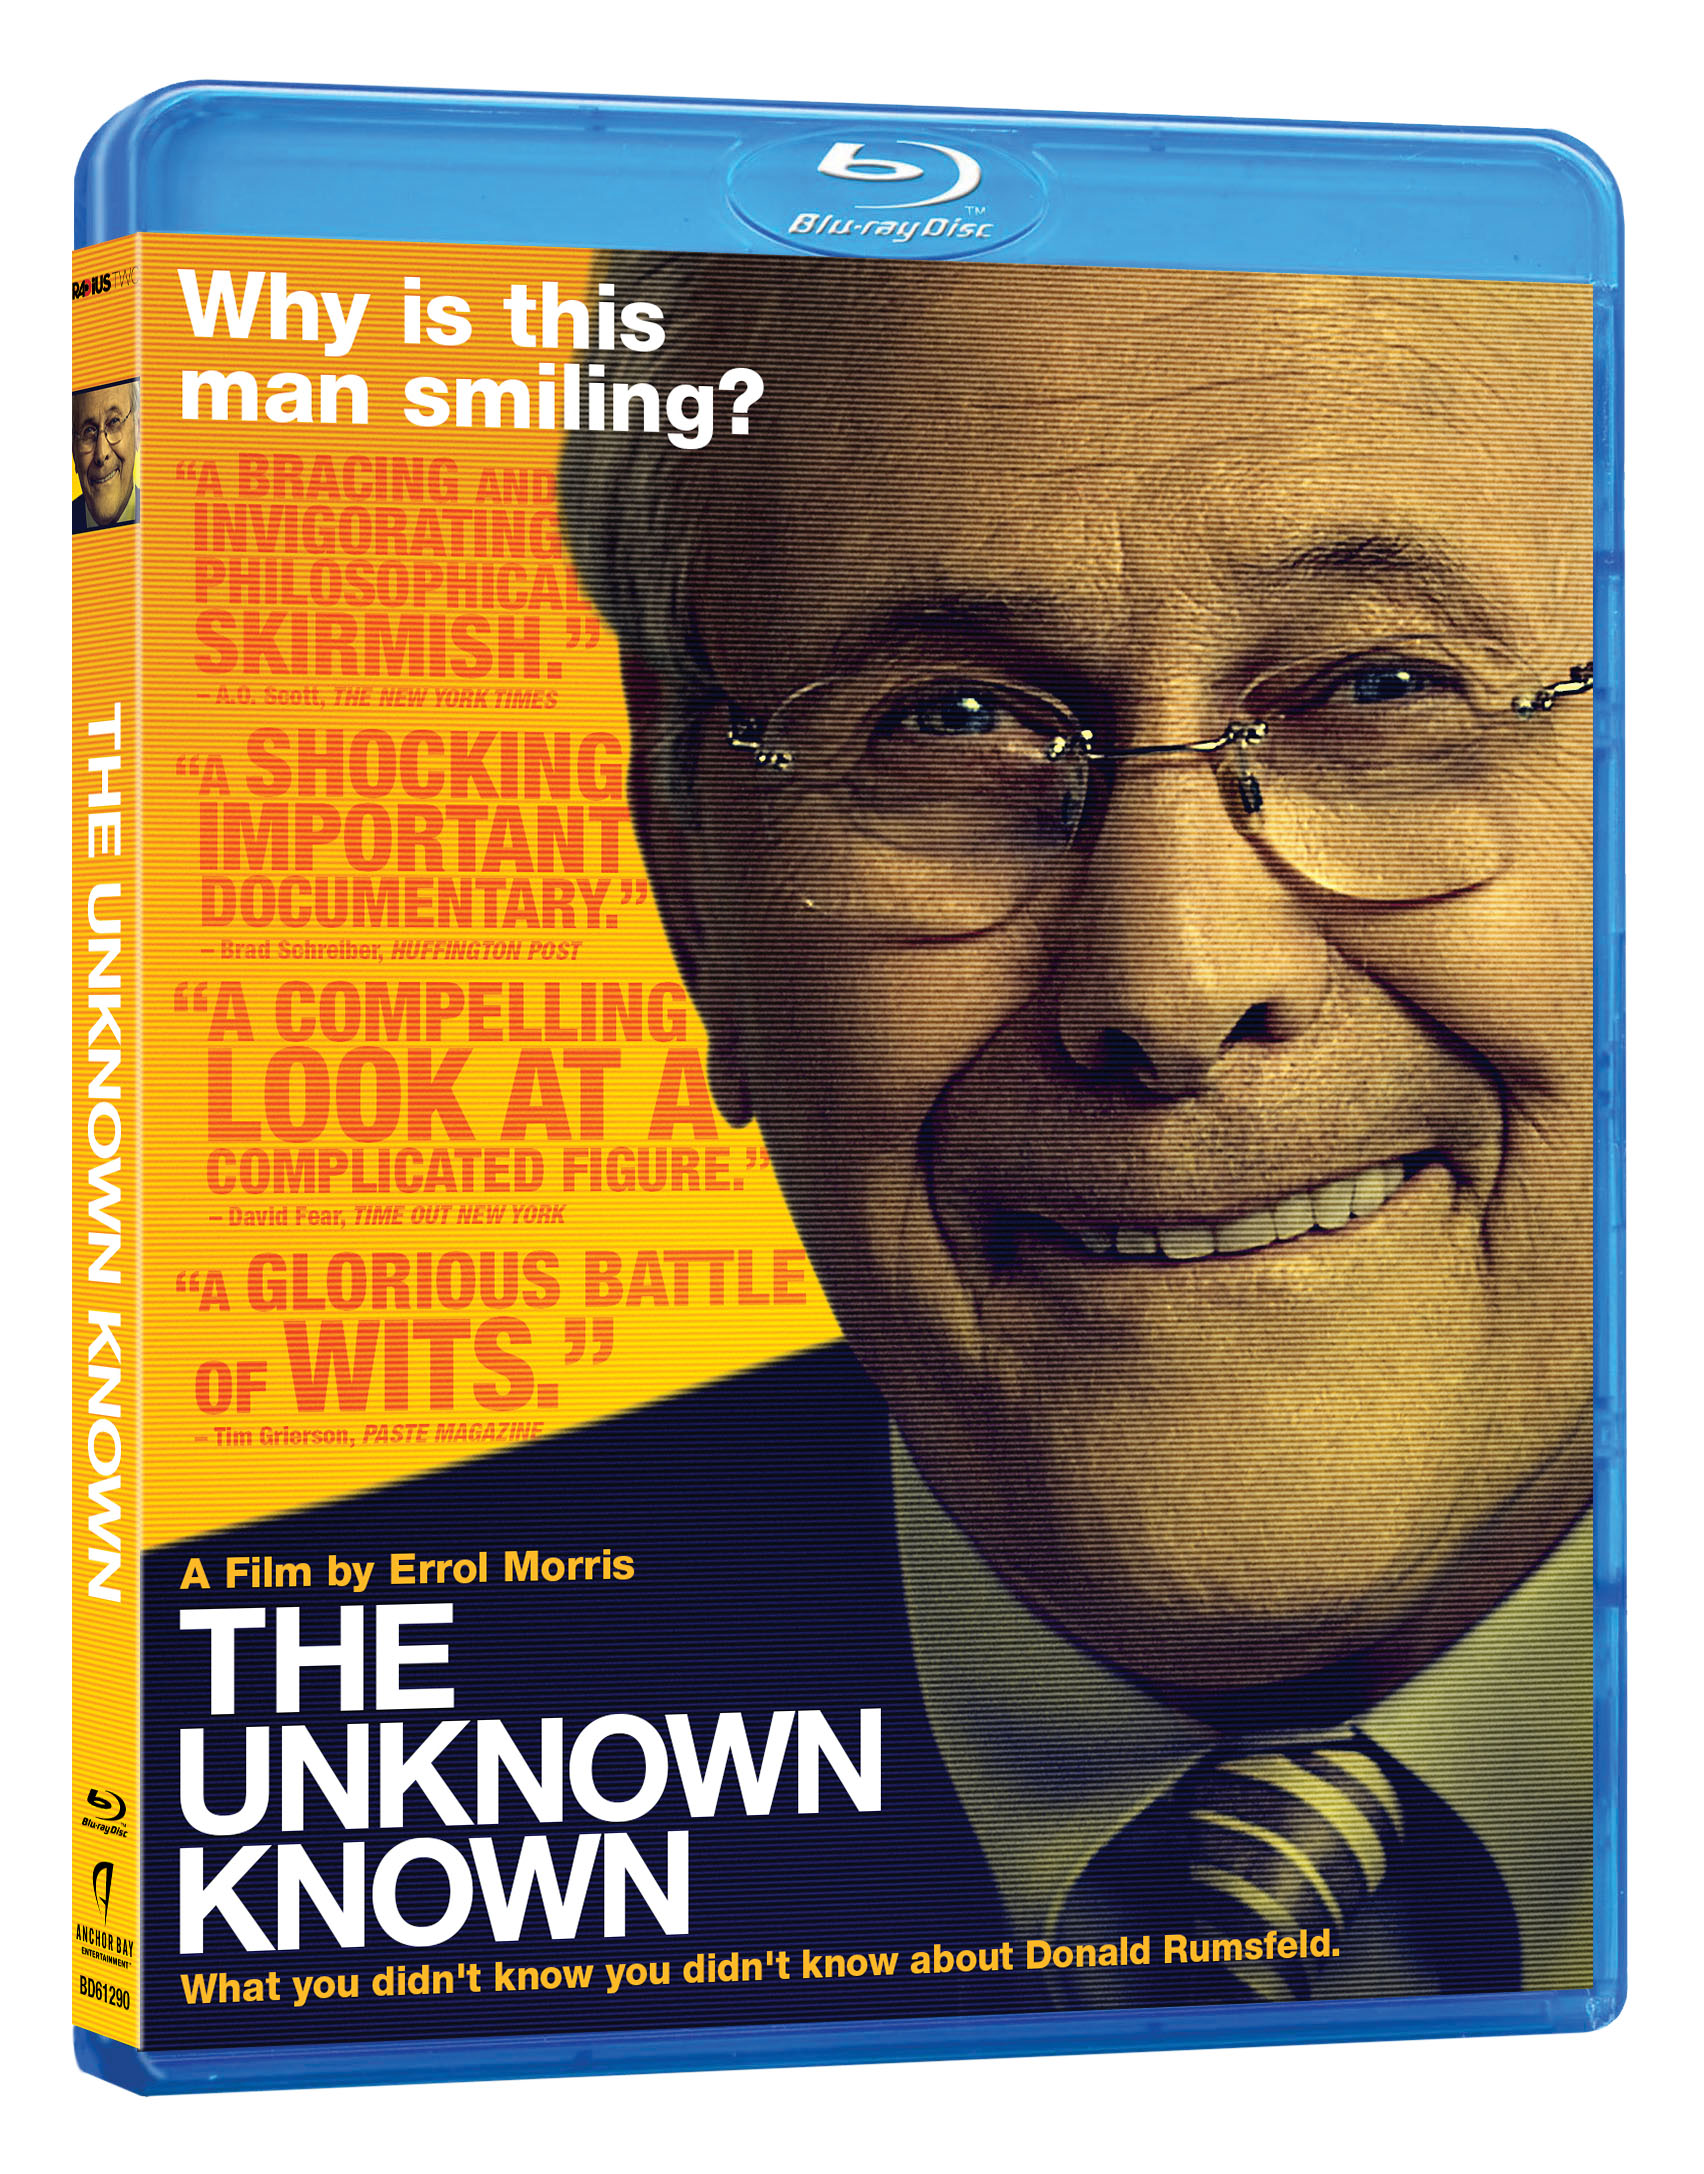 The Unknown Known Blu-ray Review